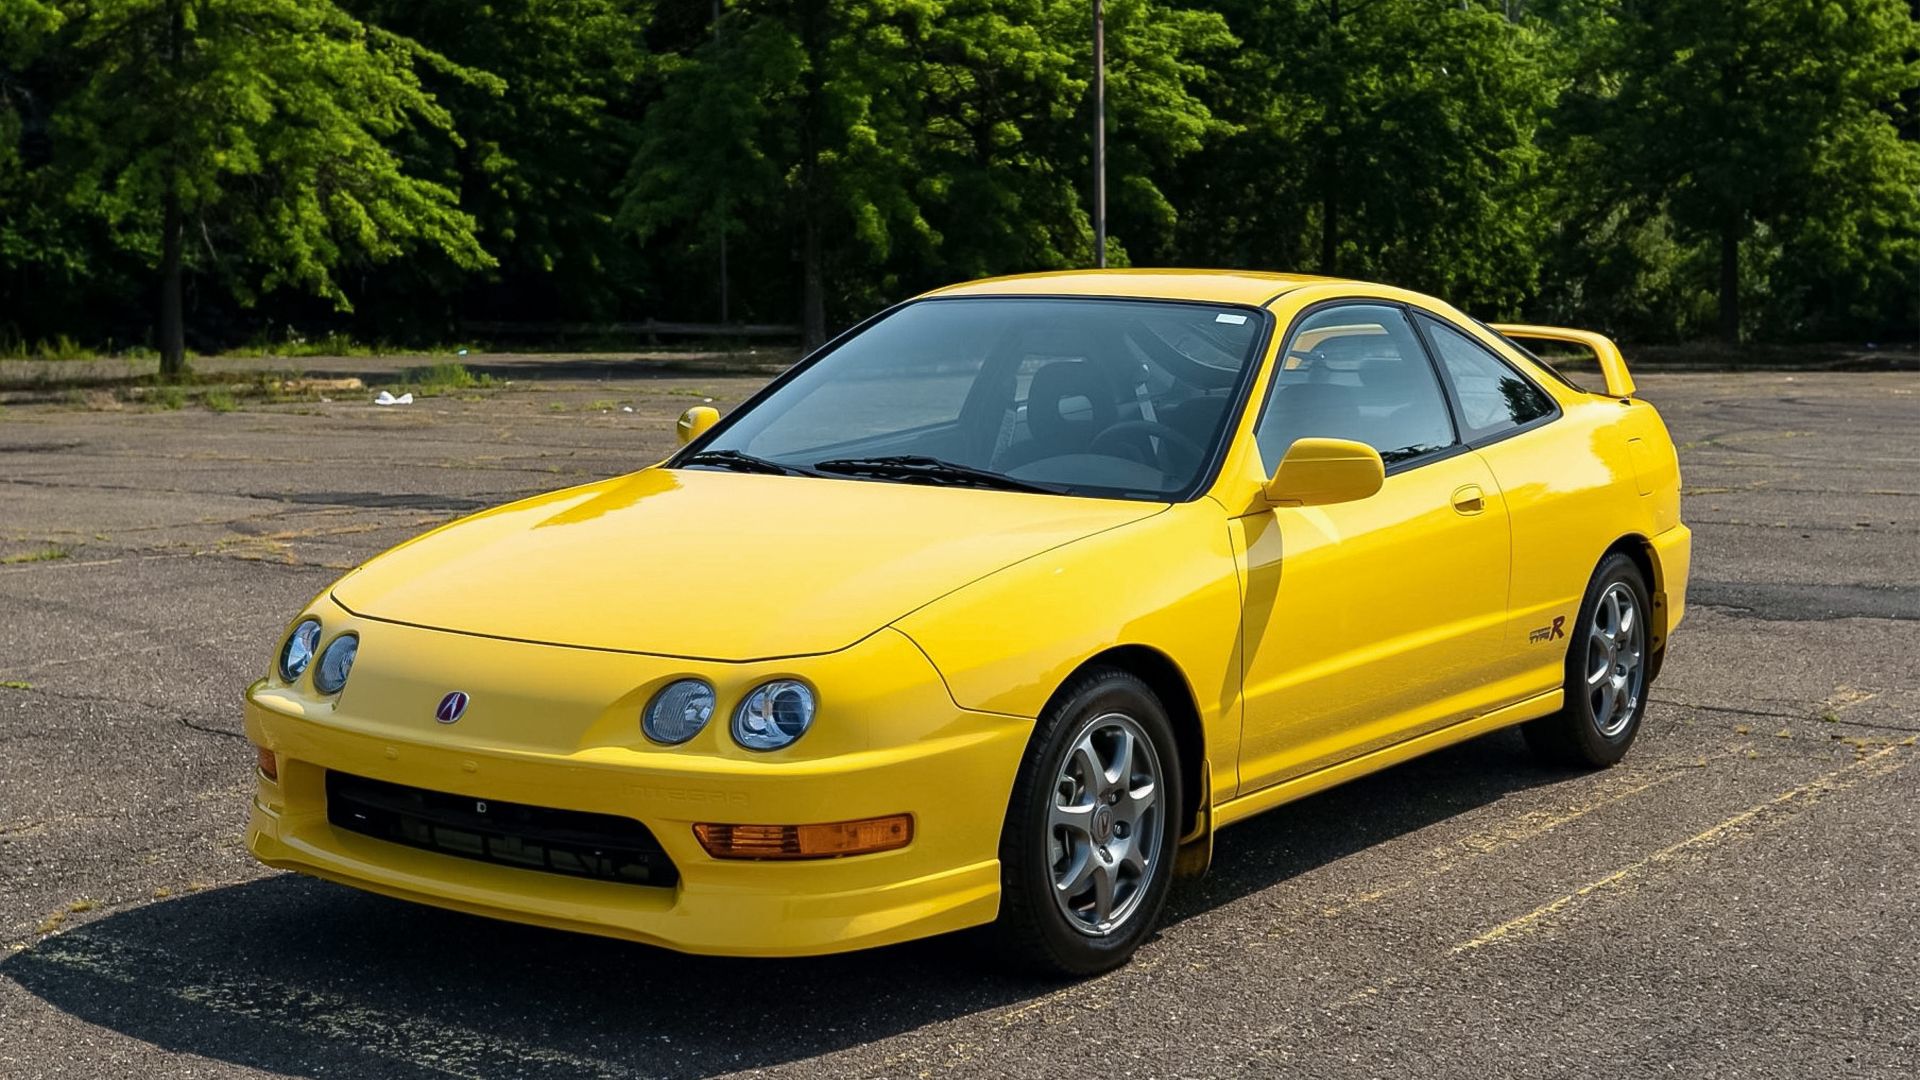 A yellow 2000 Acura Integra Type R parked oustide